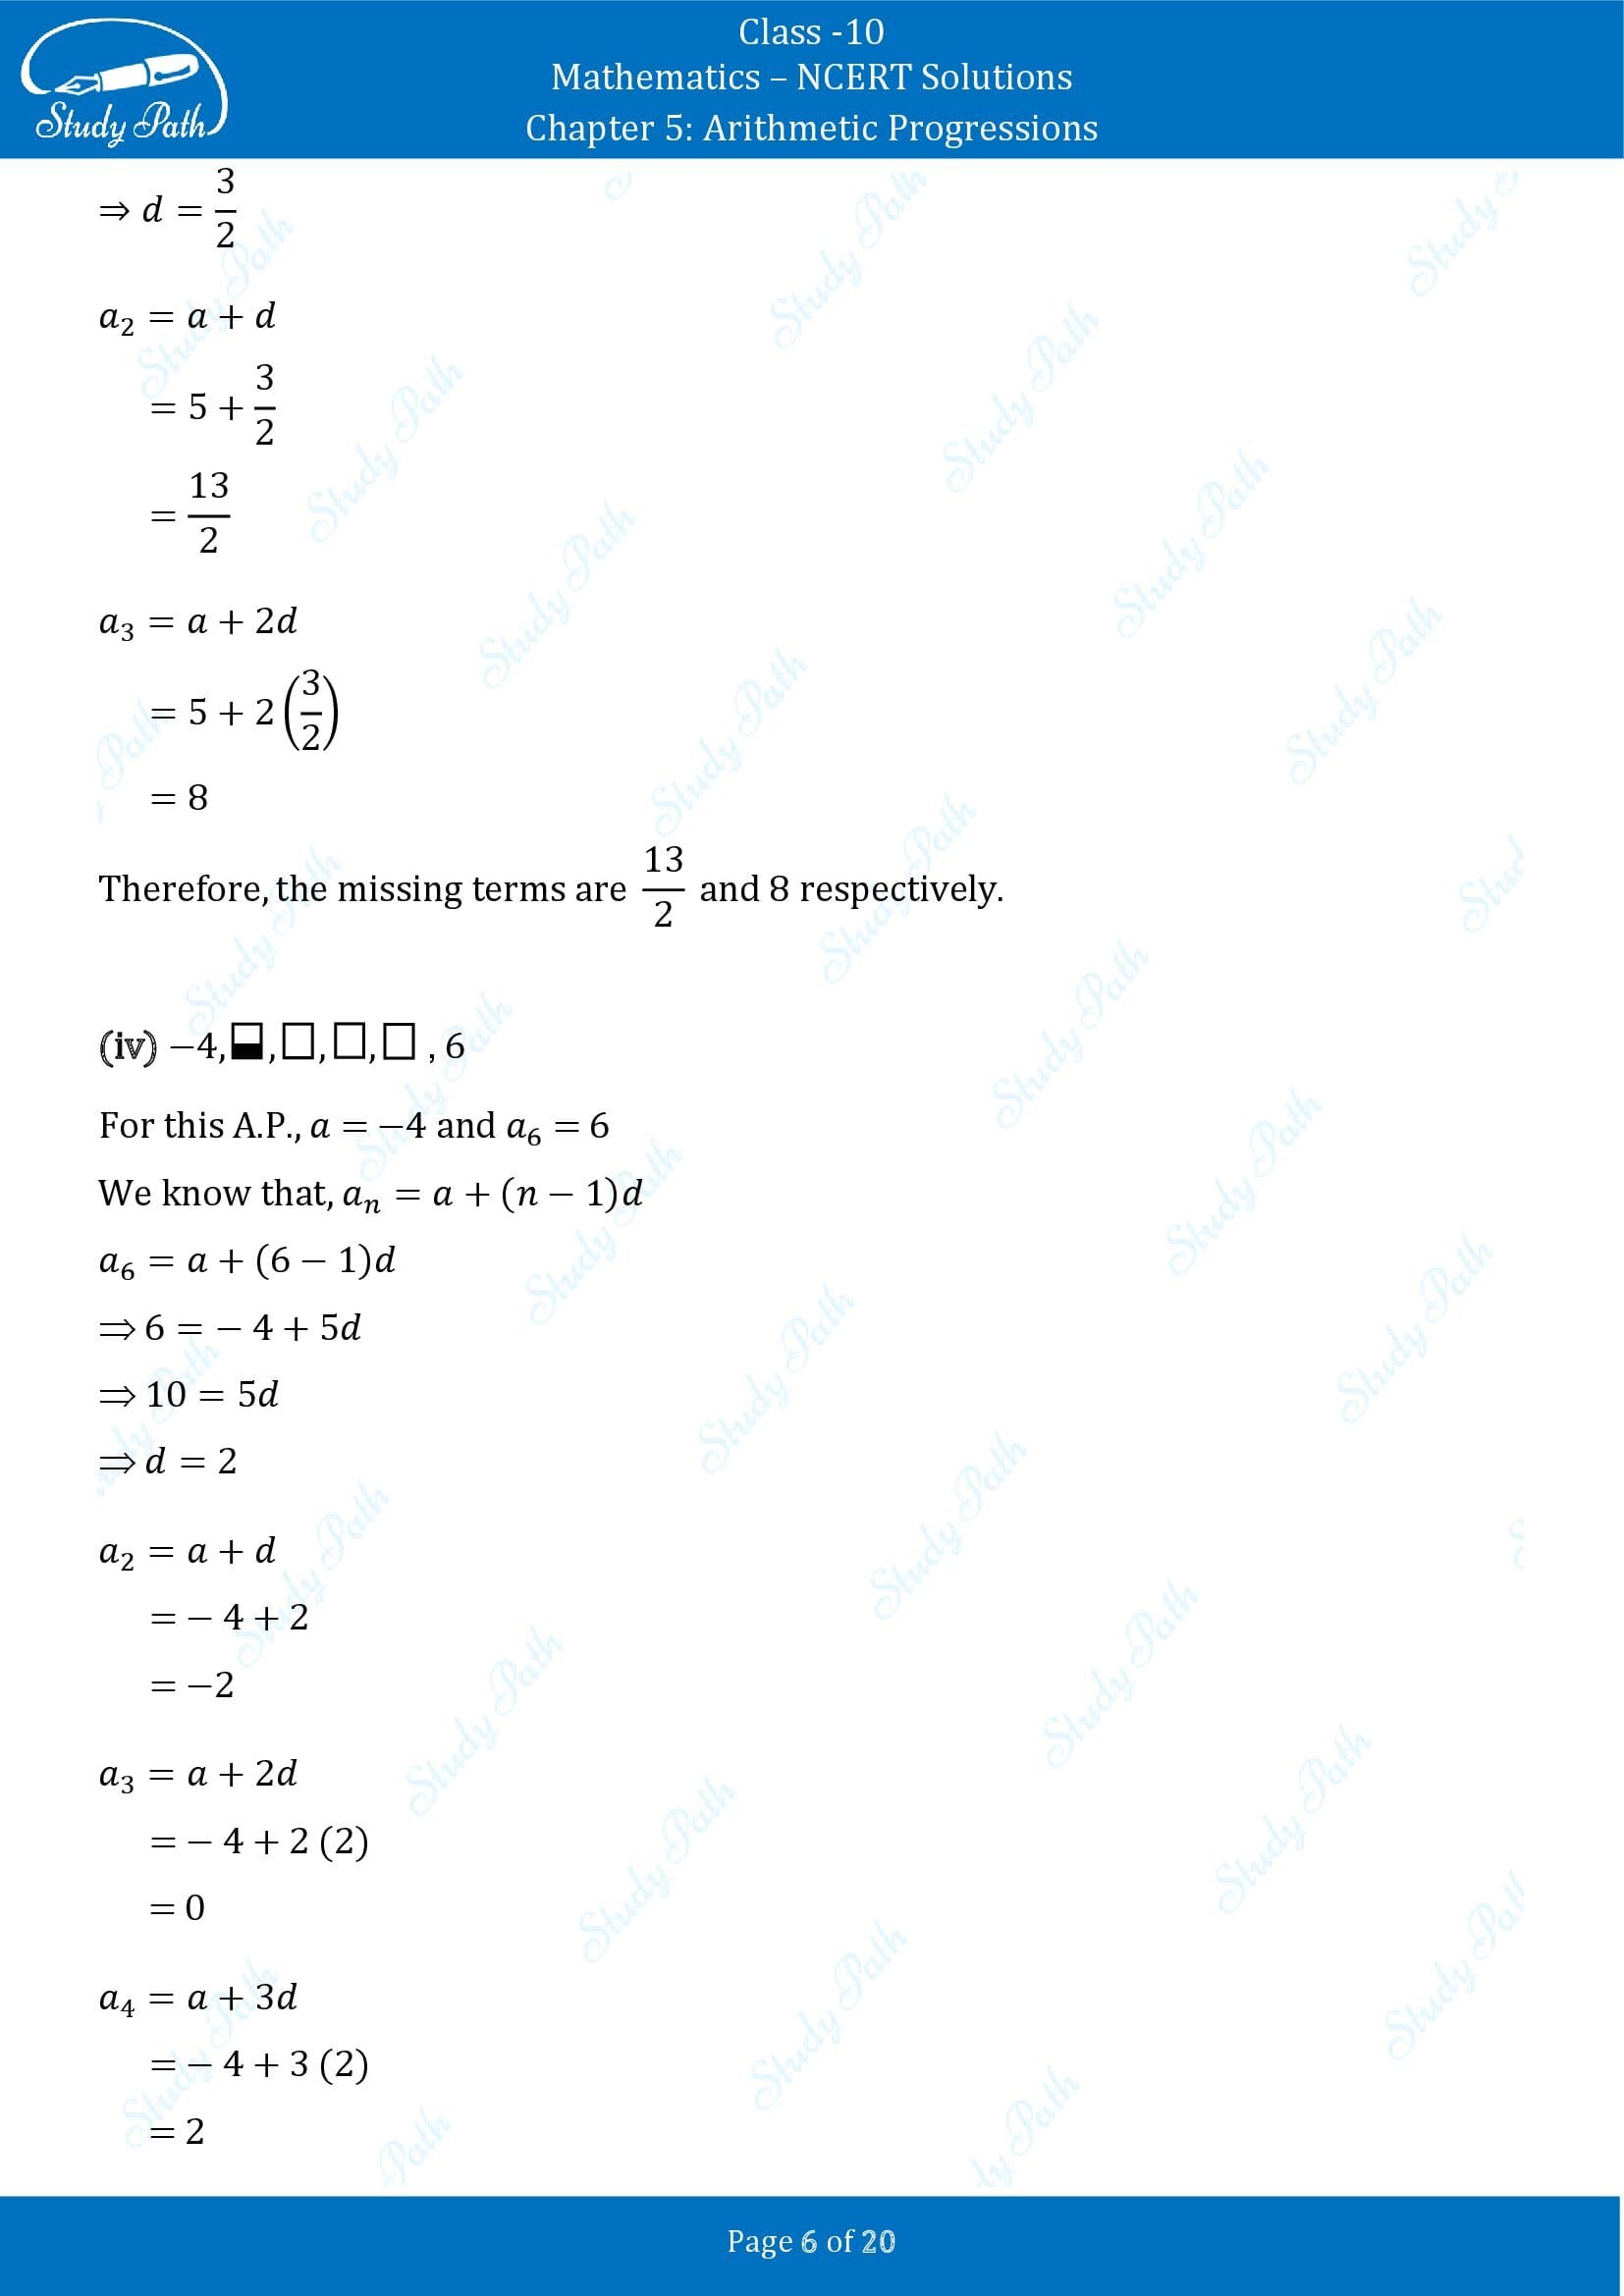 NCERT Solutions for Class 10 Maths Chapter 5 Arithmetic Progressions Exercise 5.2 00006